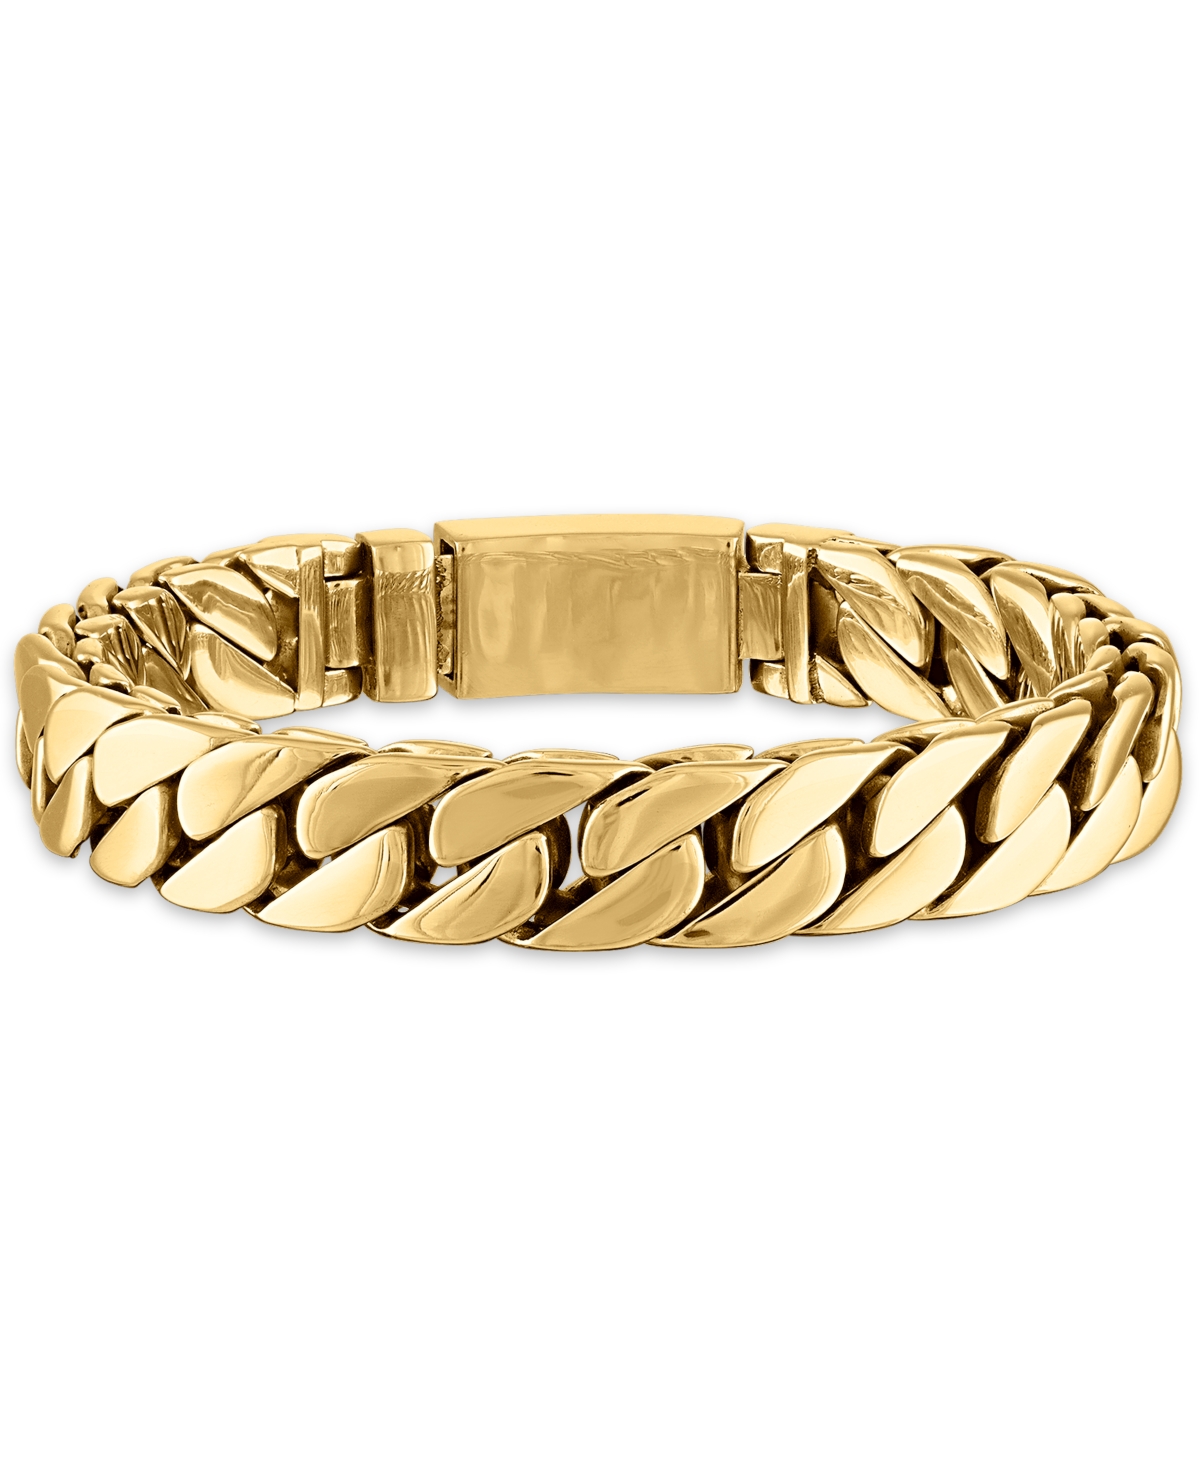 Curb Link Chain Bracelet in Gold-Tone Ion-Plated Stainless Steel, Created for Macy's (Also in Stainless Steel) - Gold-Tone